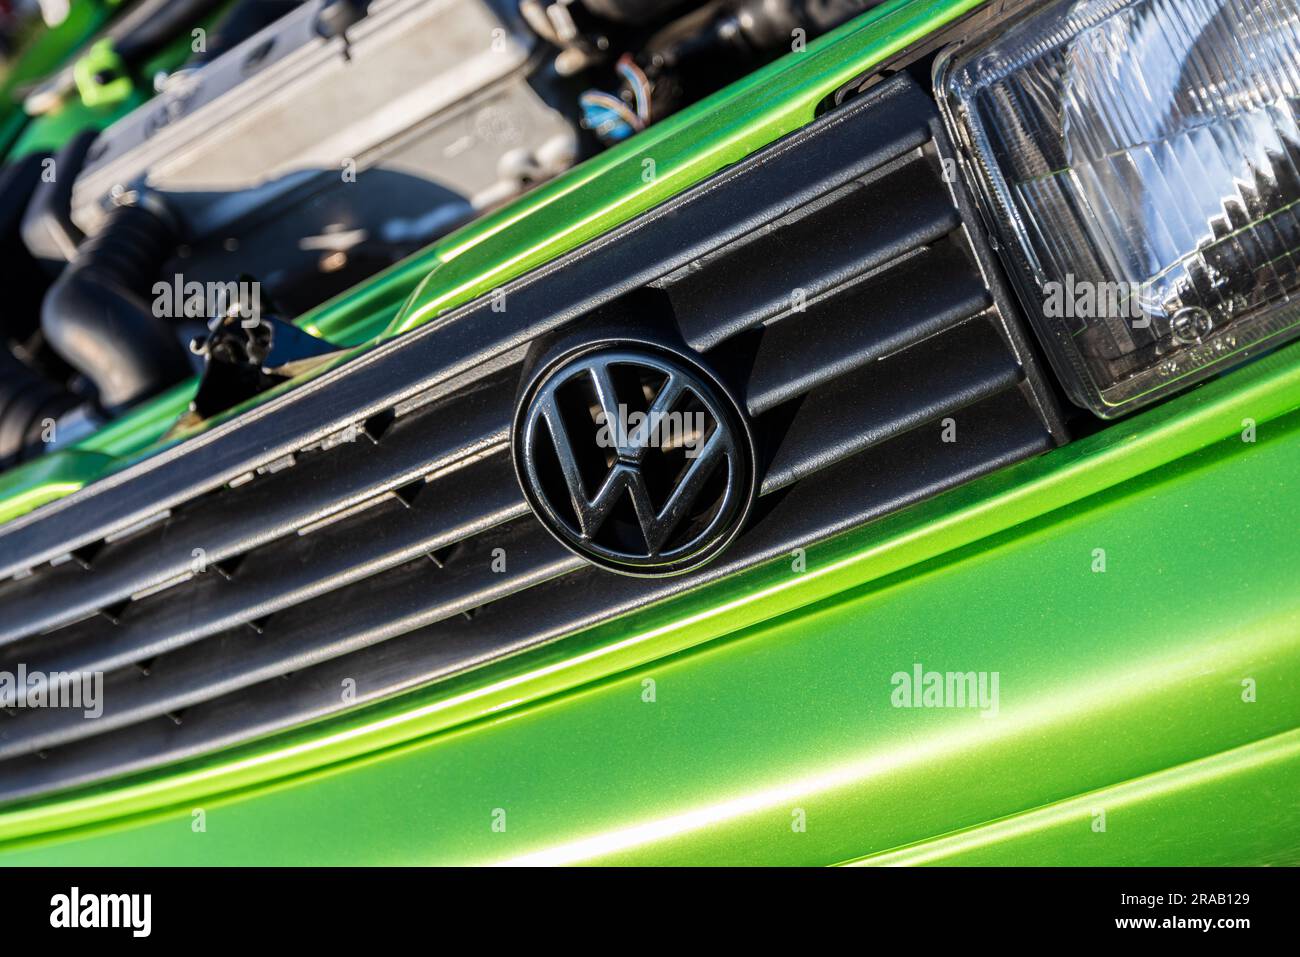 Berlin, Germany - June 24, 2023: Volkswagen logo on a green tuned Volkswagen car at a meadow. Stock Photo